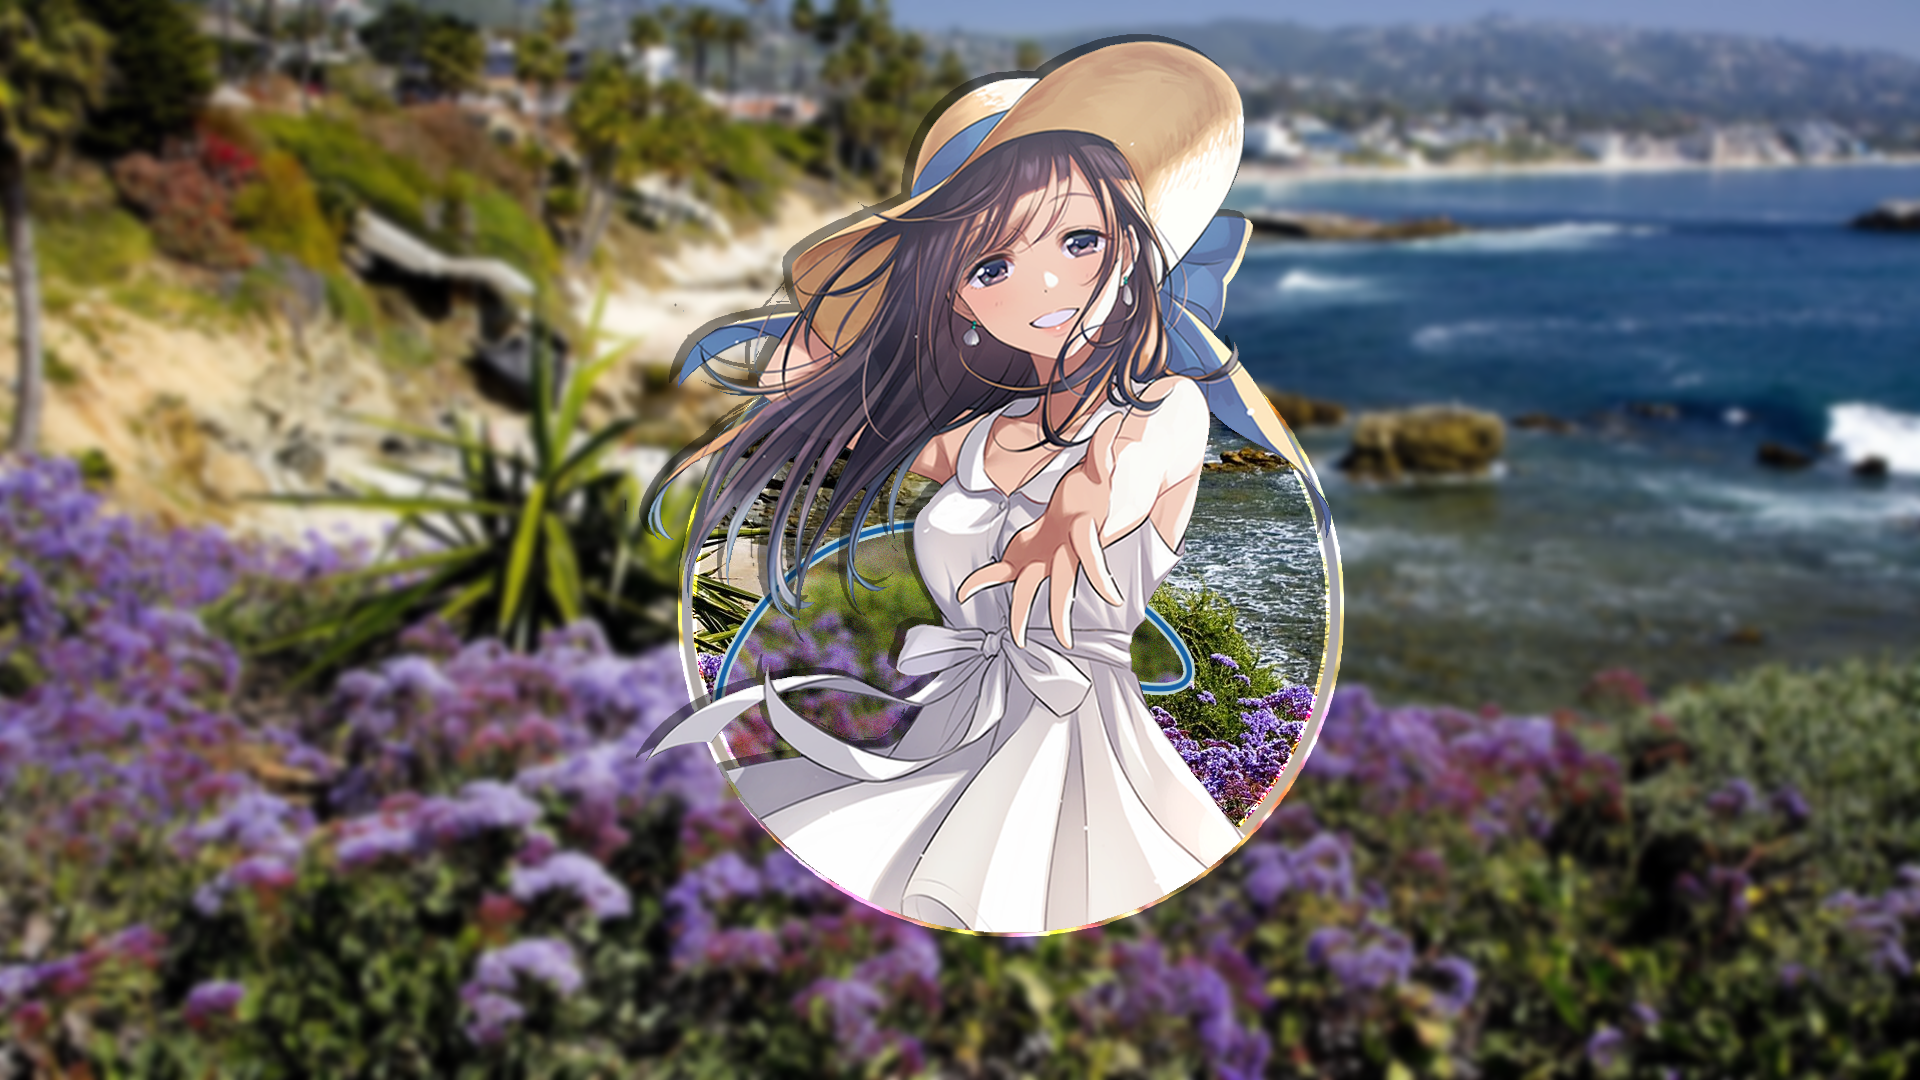 Anime 1920x1080 picture-in-picture anime girls beach landscape flowers sun hats arms reaching looking at viewer hat water white dress smiling sun dress long hair dark hair dark eyes straw hat blurred